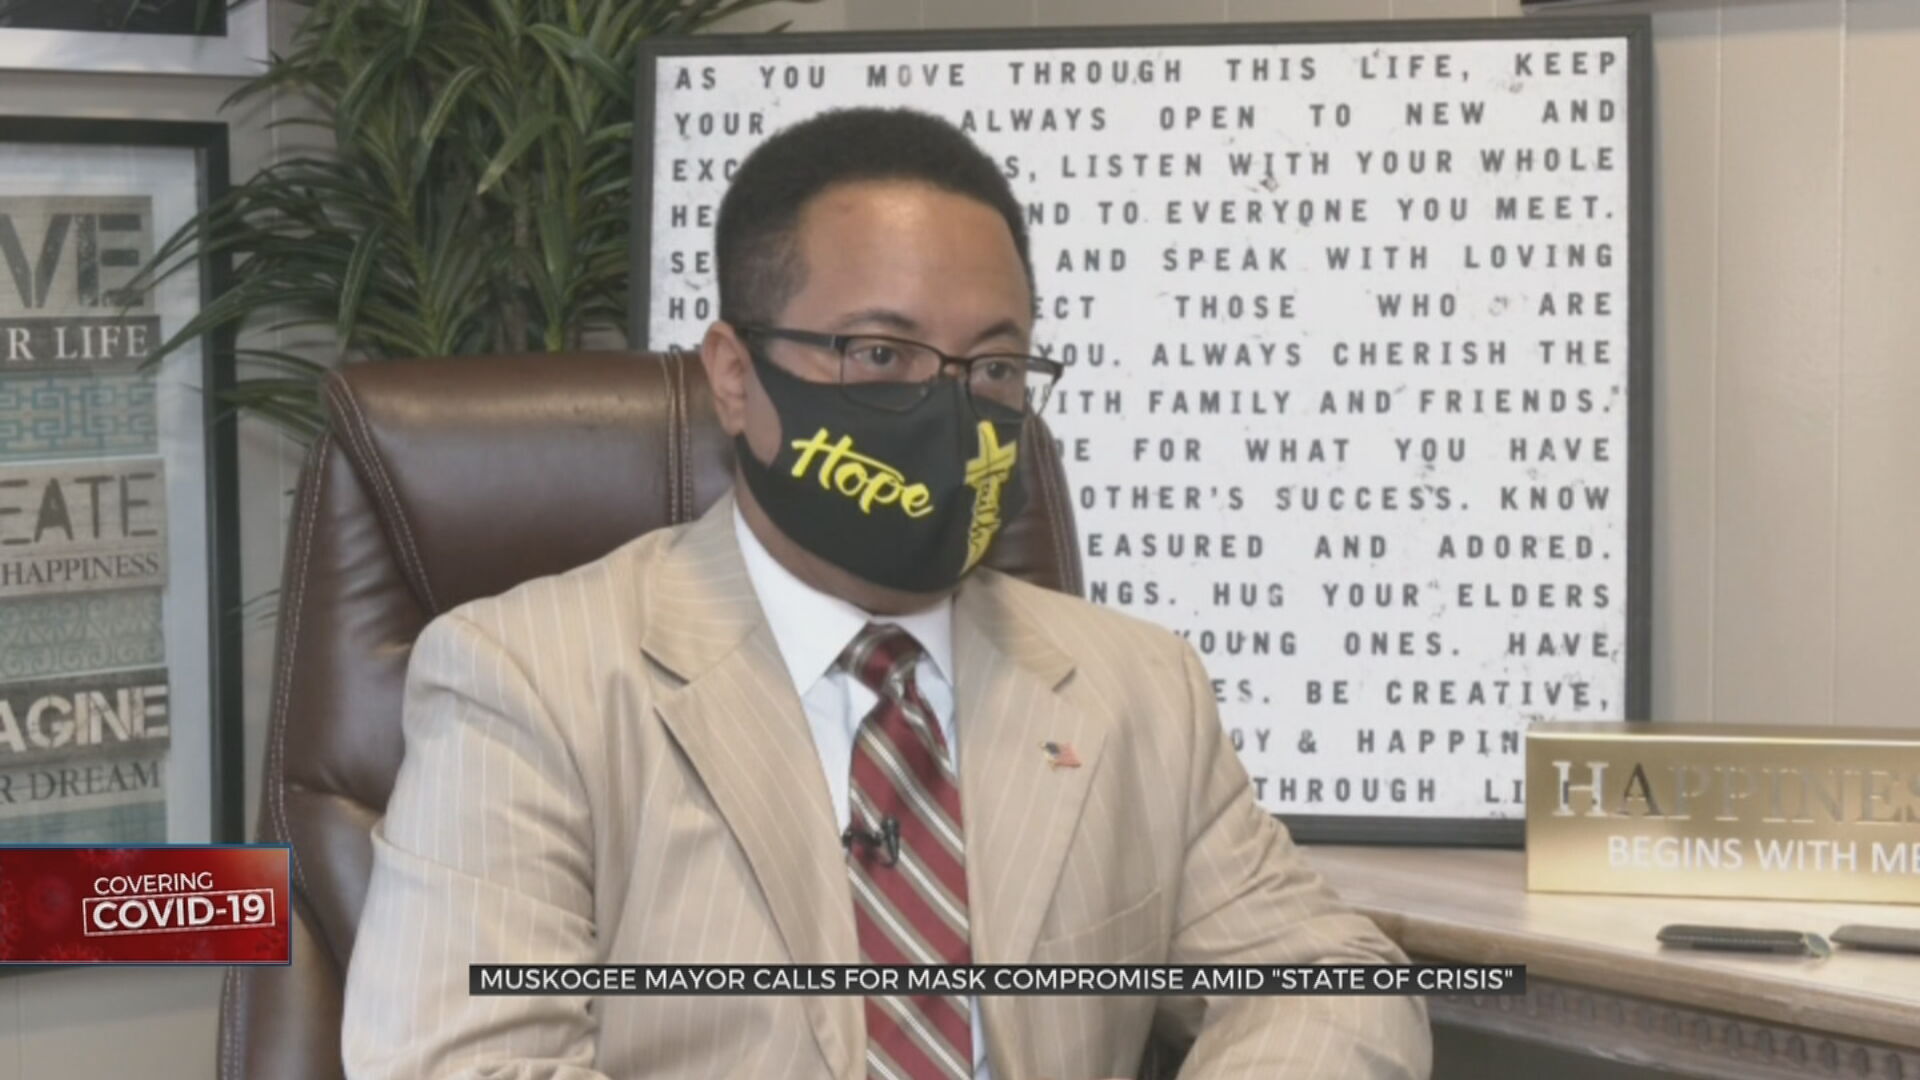 Muskogee Mayor Calls For Mask Compromise Amid ‘State Of Crisis’ 